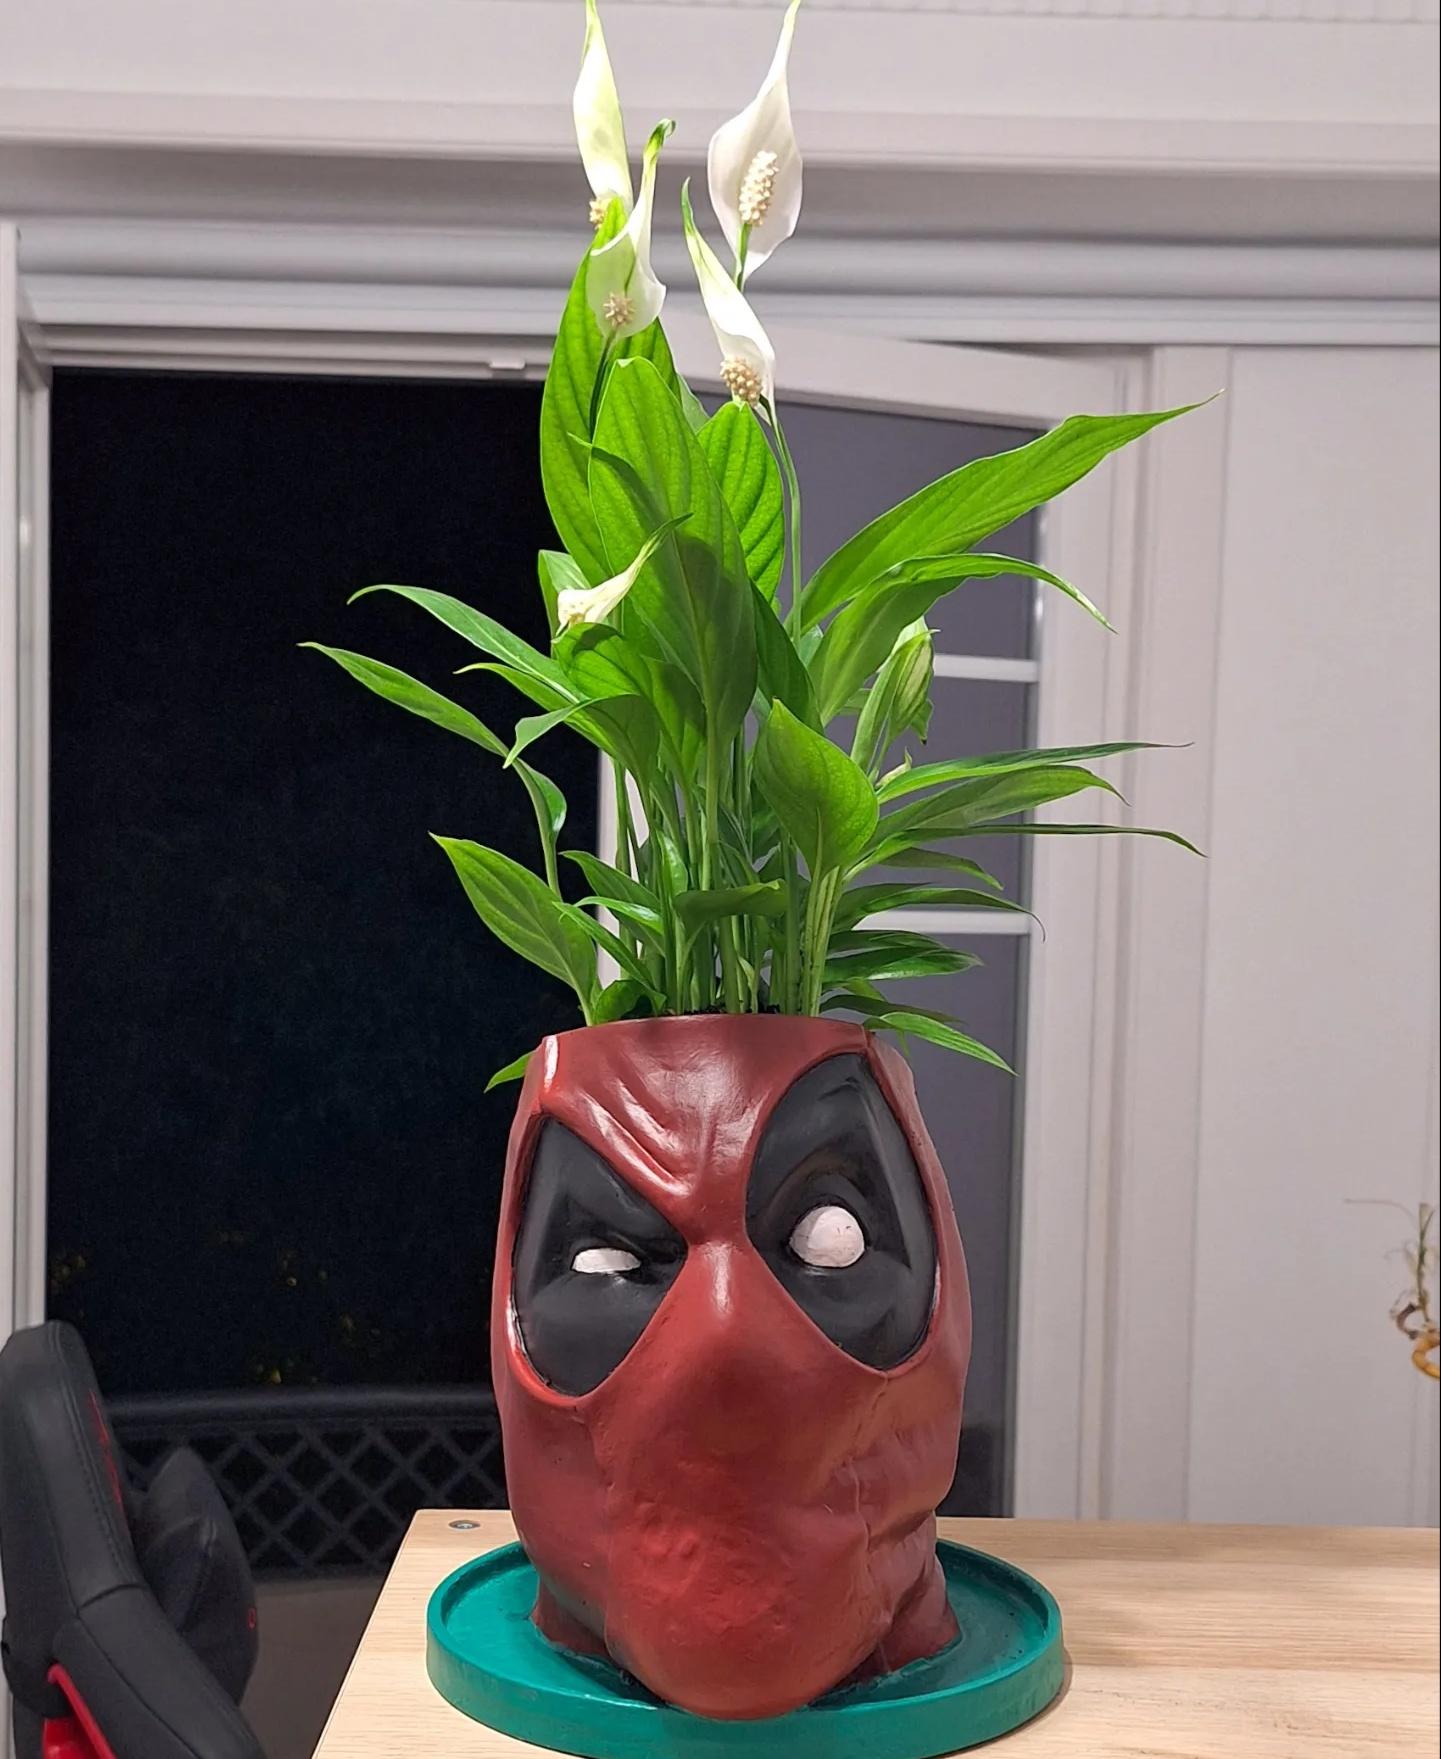 Deadpool Planter - No Supports - This was my very first attempt at painting anything so a lot of mistakes were made alone the way.

Still, happy with the end result. - 3d model